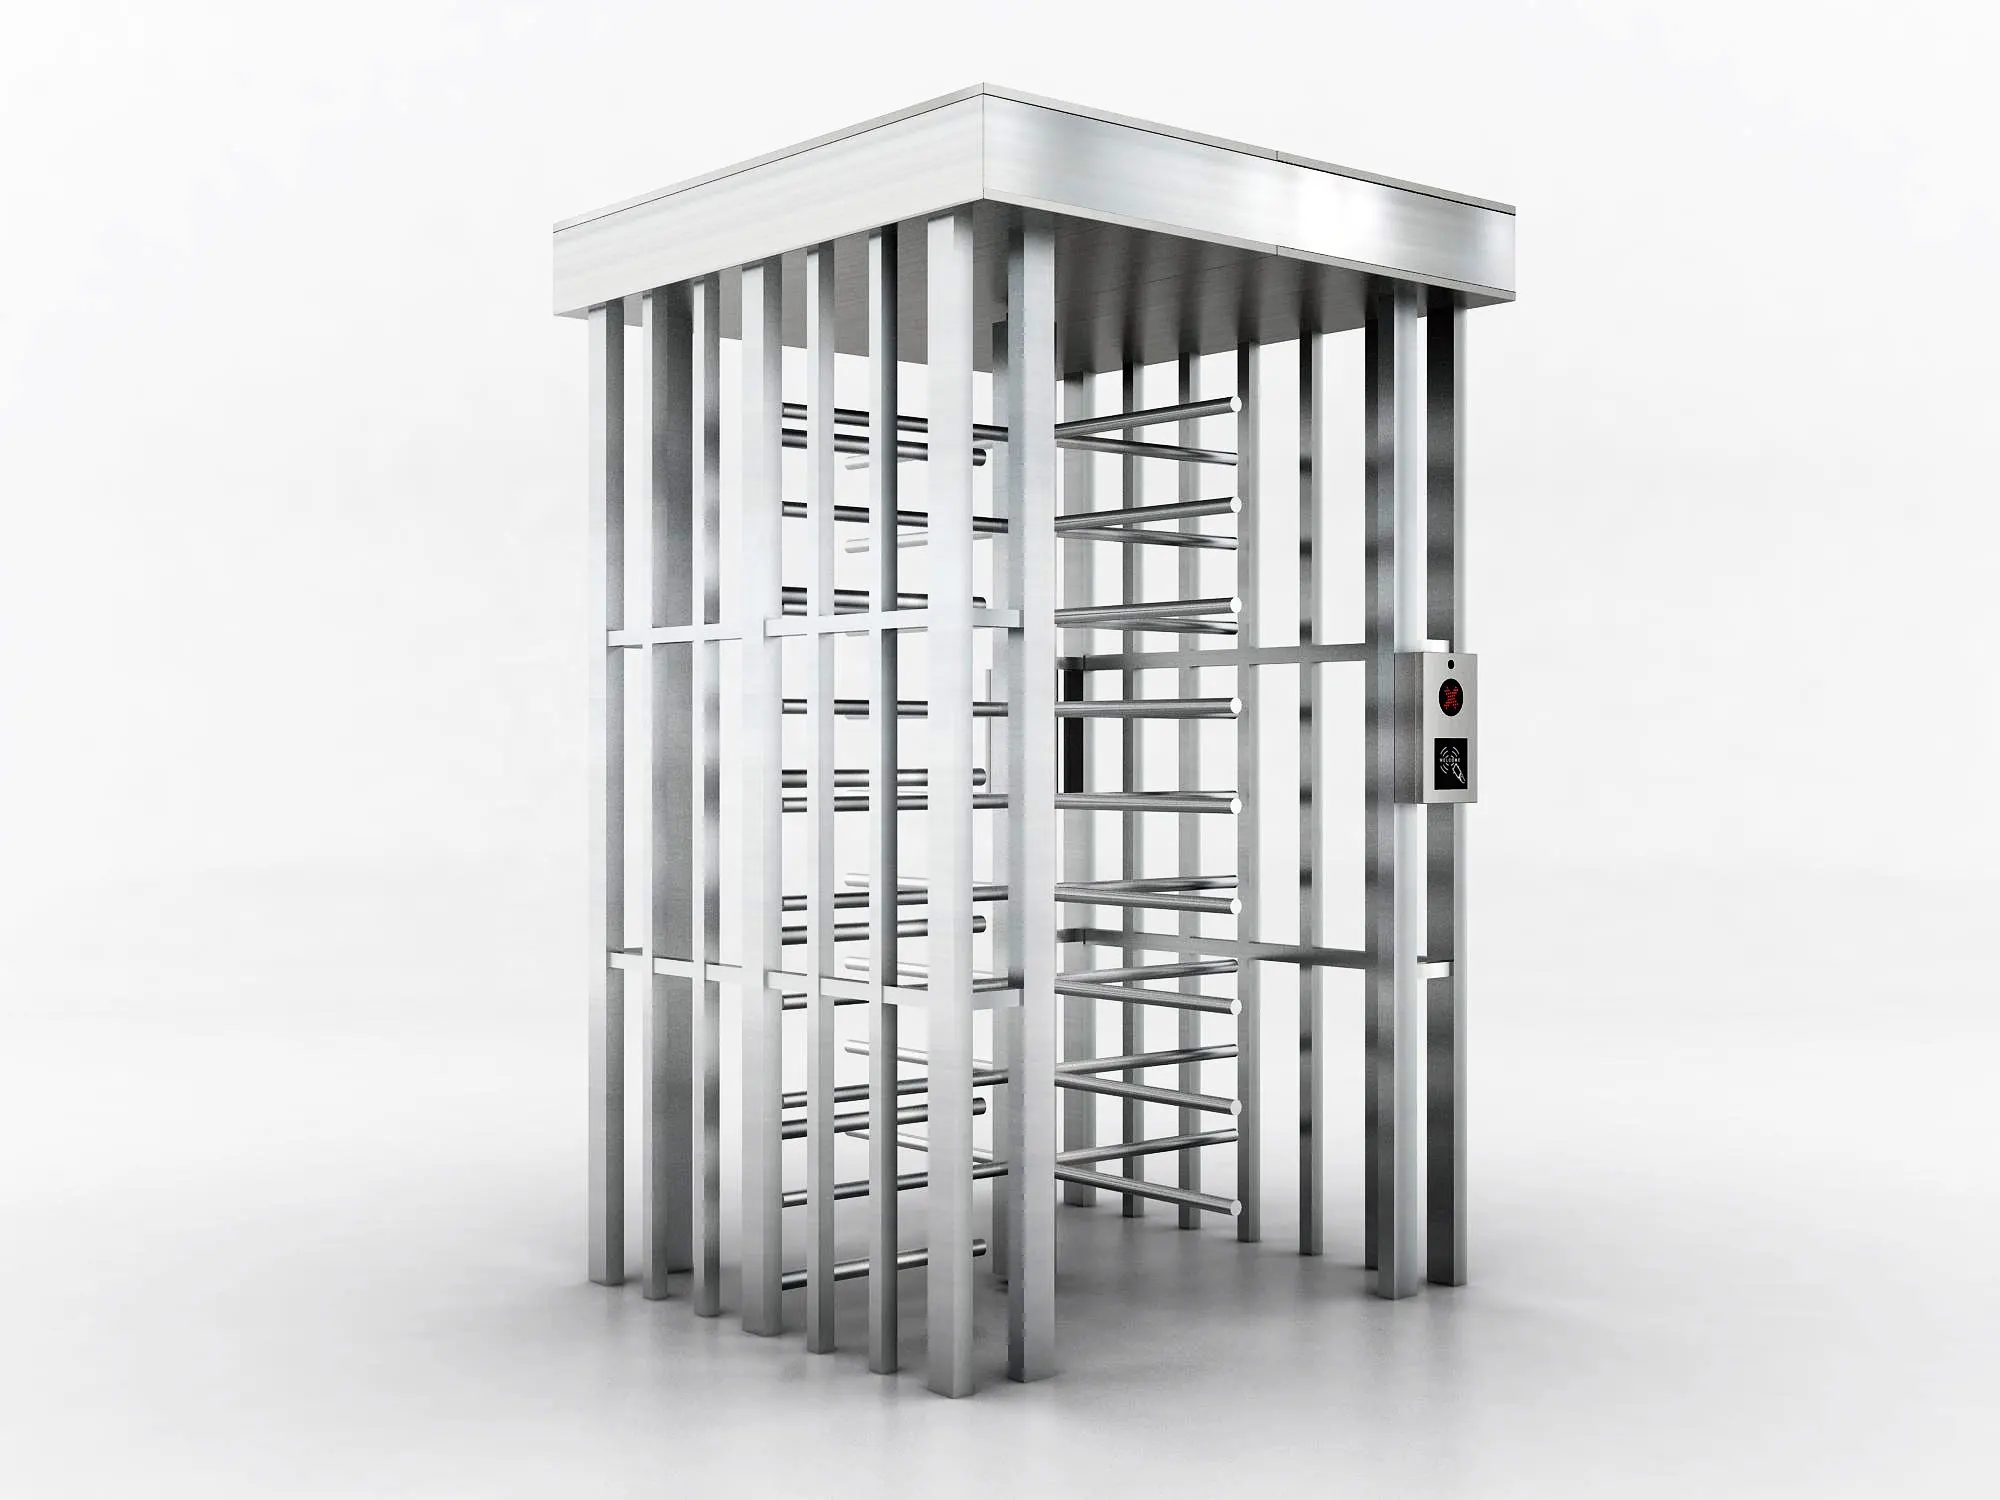 Outdoor Anti-Rust Stainless Steel Tourniquet Access Control Full Height Turnstile Gate For Park